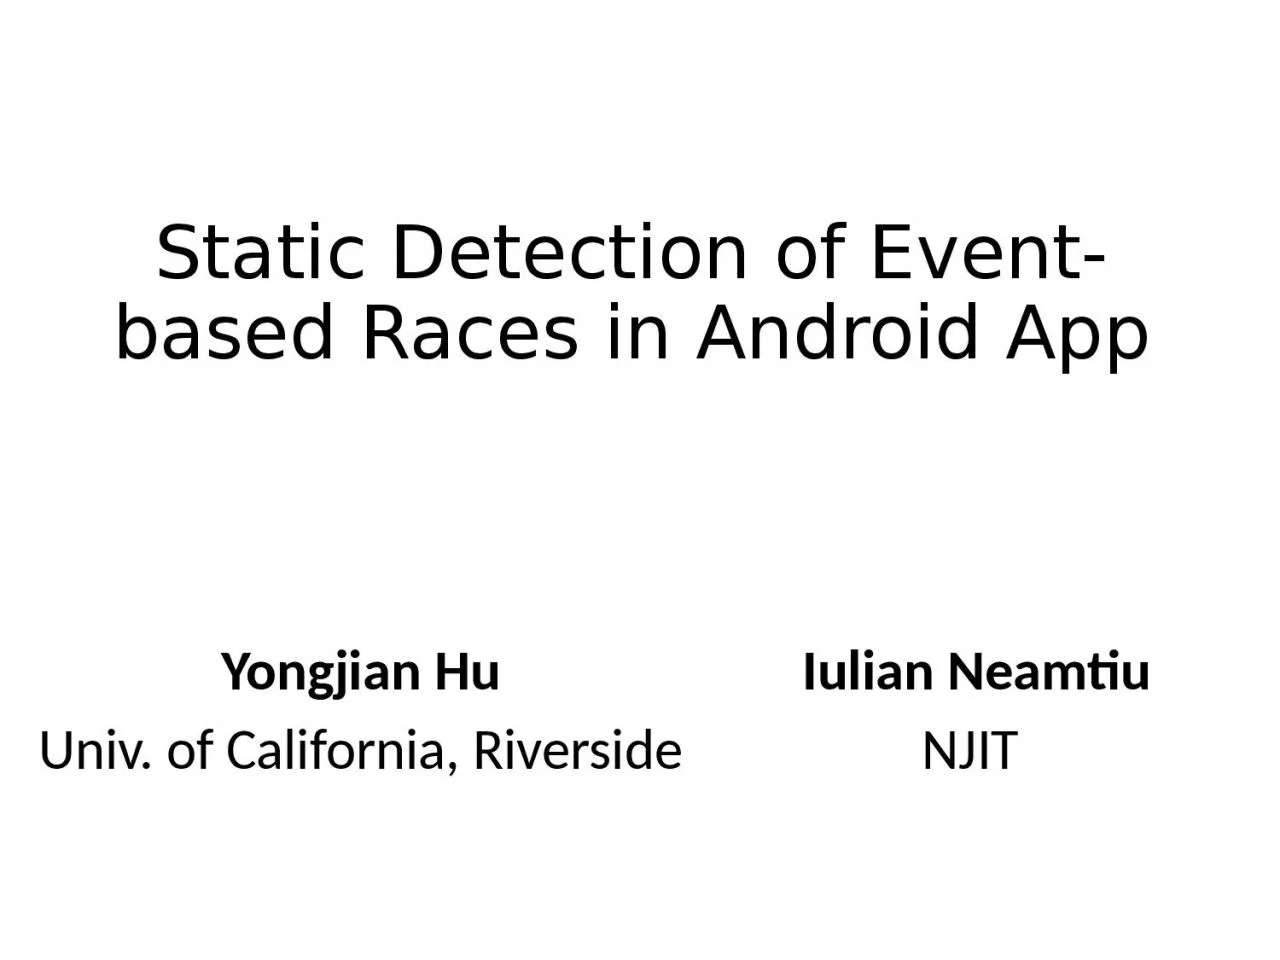 Static Detection of Event-based Races in Android App